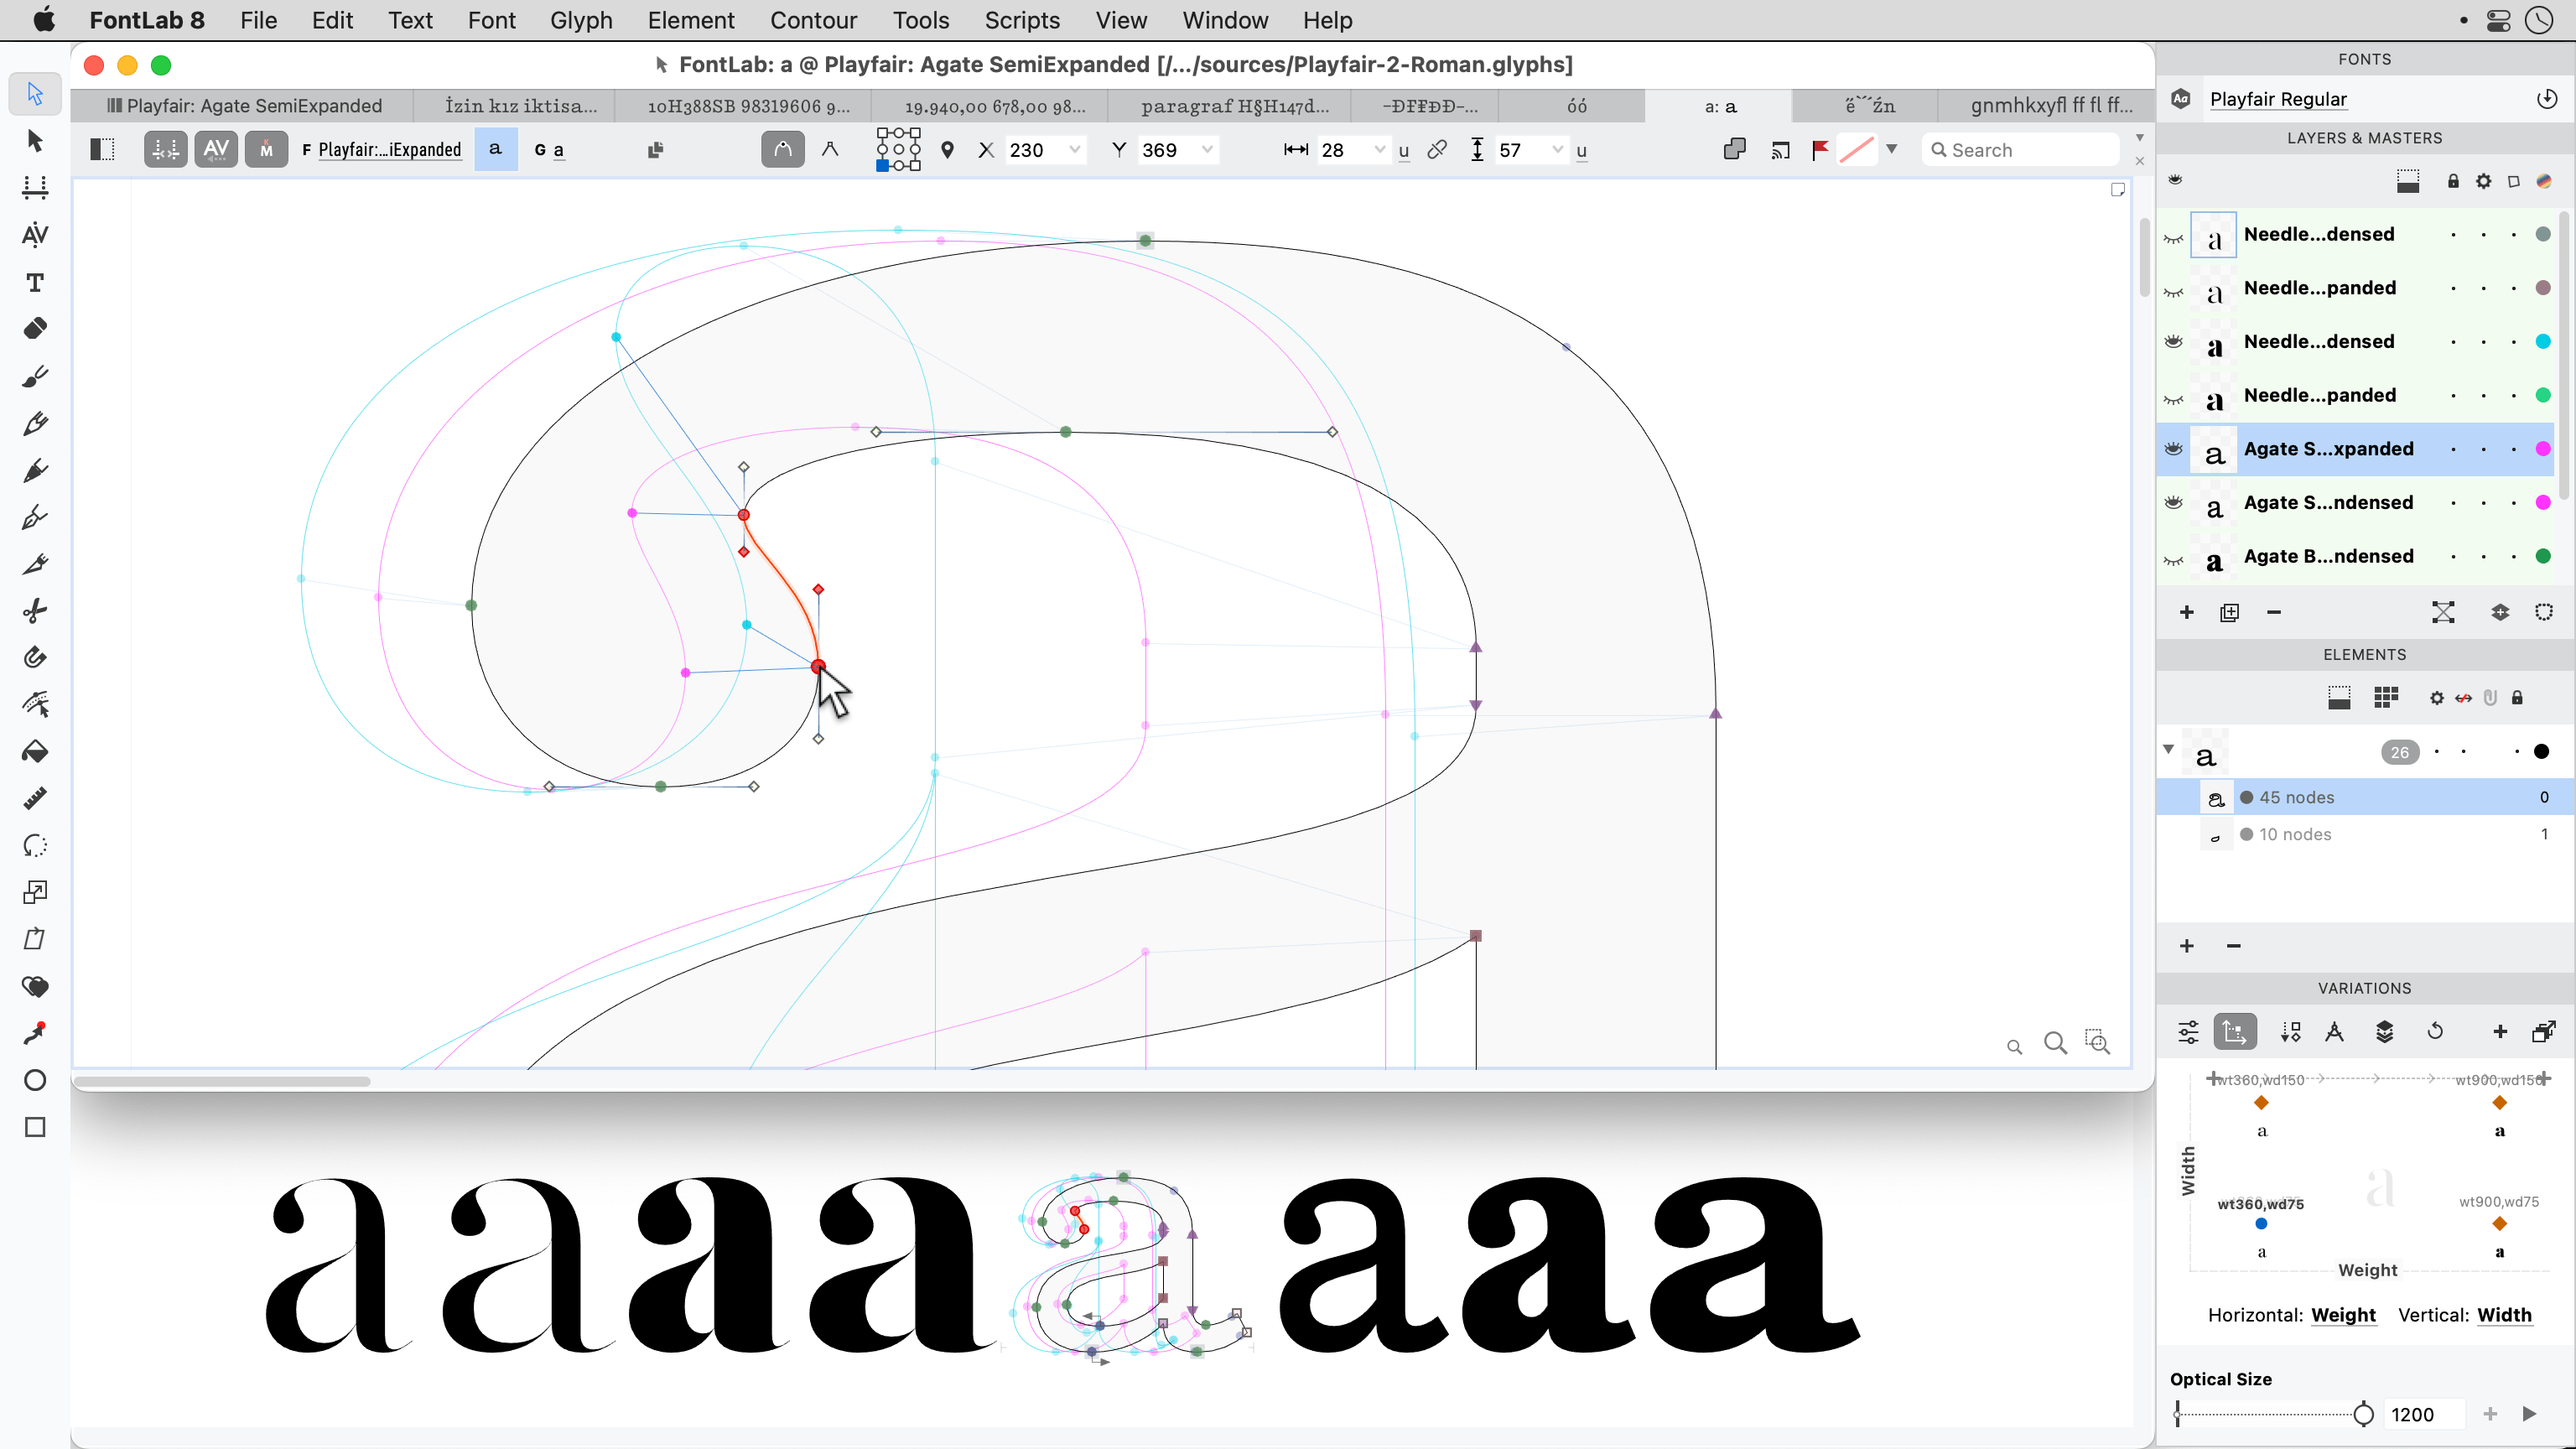 A screenshot from a typeface designing software called FontLab Studio